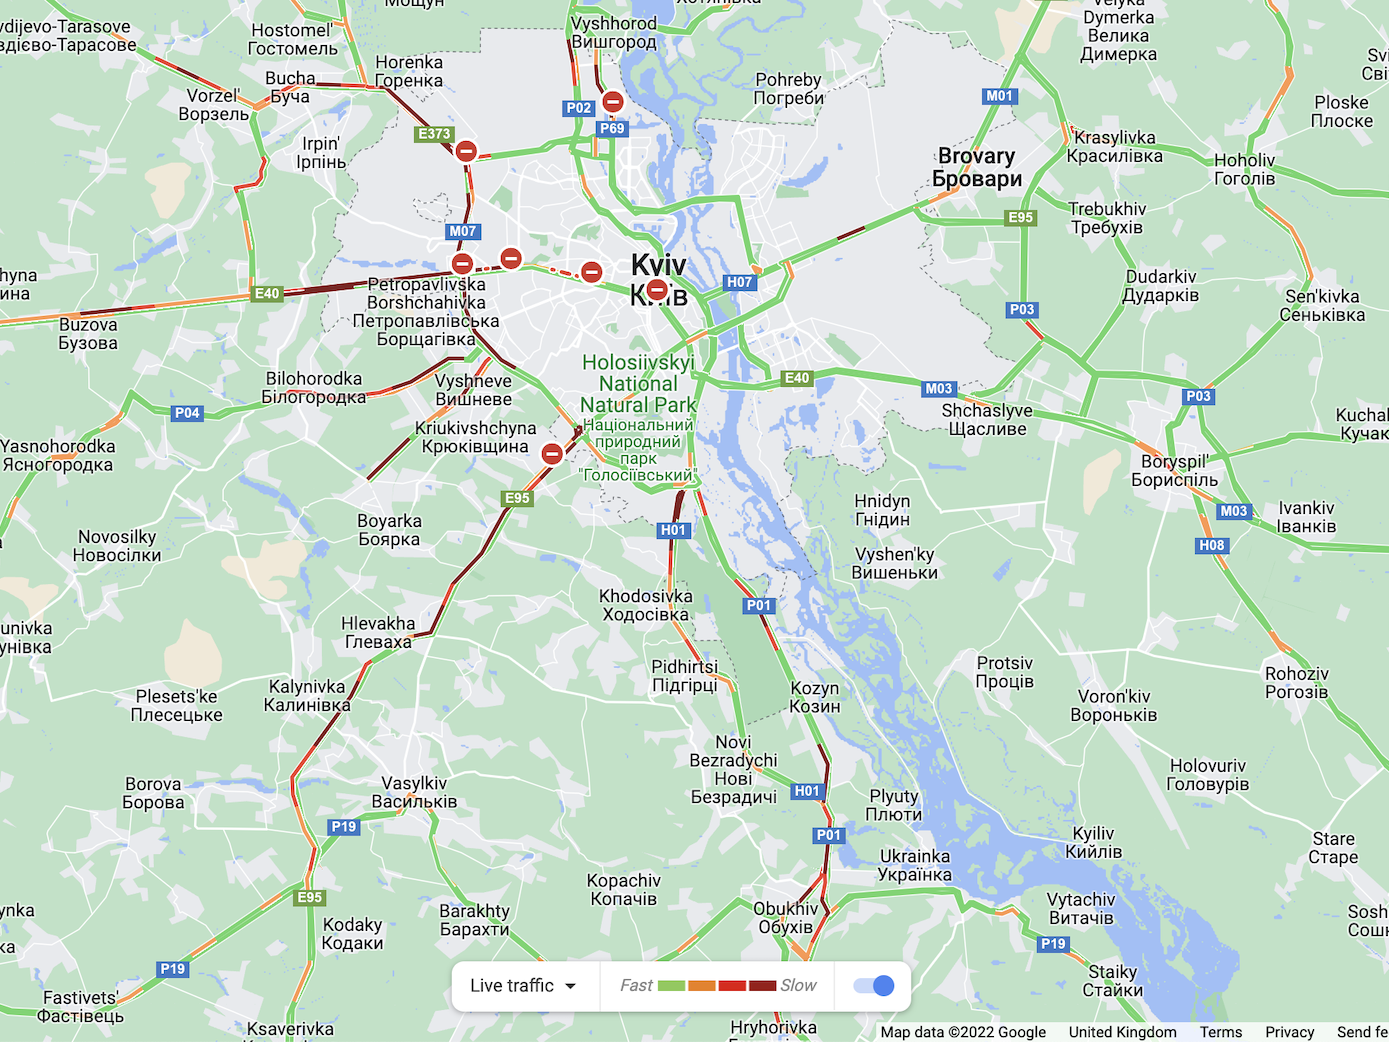 A google map shows the speed of traffic in Kyiv.